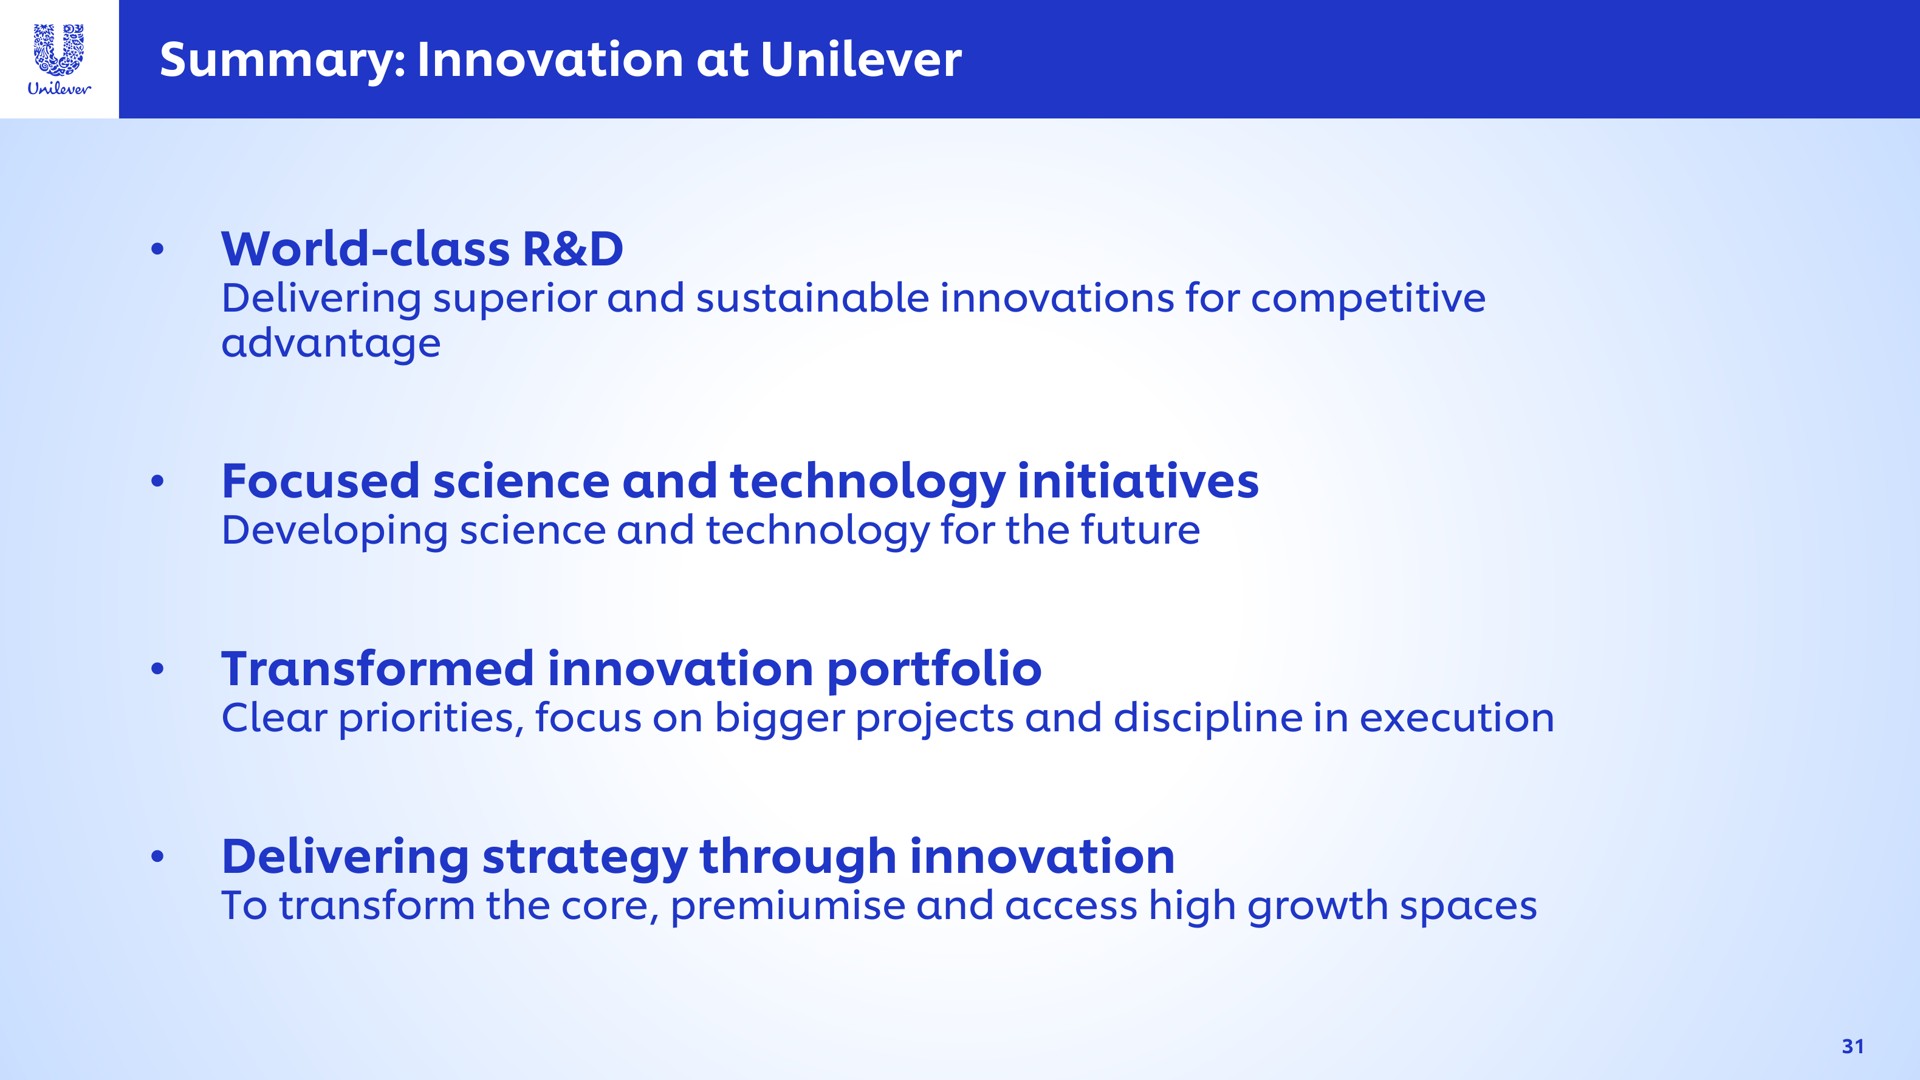 summary innovation at world class focused science and technology initiatives transformed innovation portfolio delivering strategy through innovation superior sustainable innovations for competitive advantage developing for the future clear priorities focus on bigger projects discipline in execution to transform the core access high growth spaces | Unilever